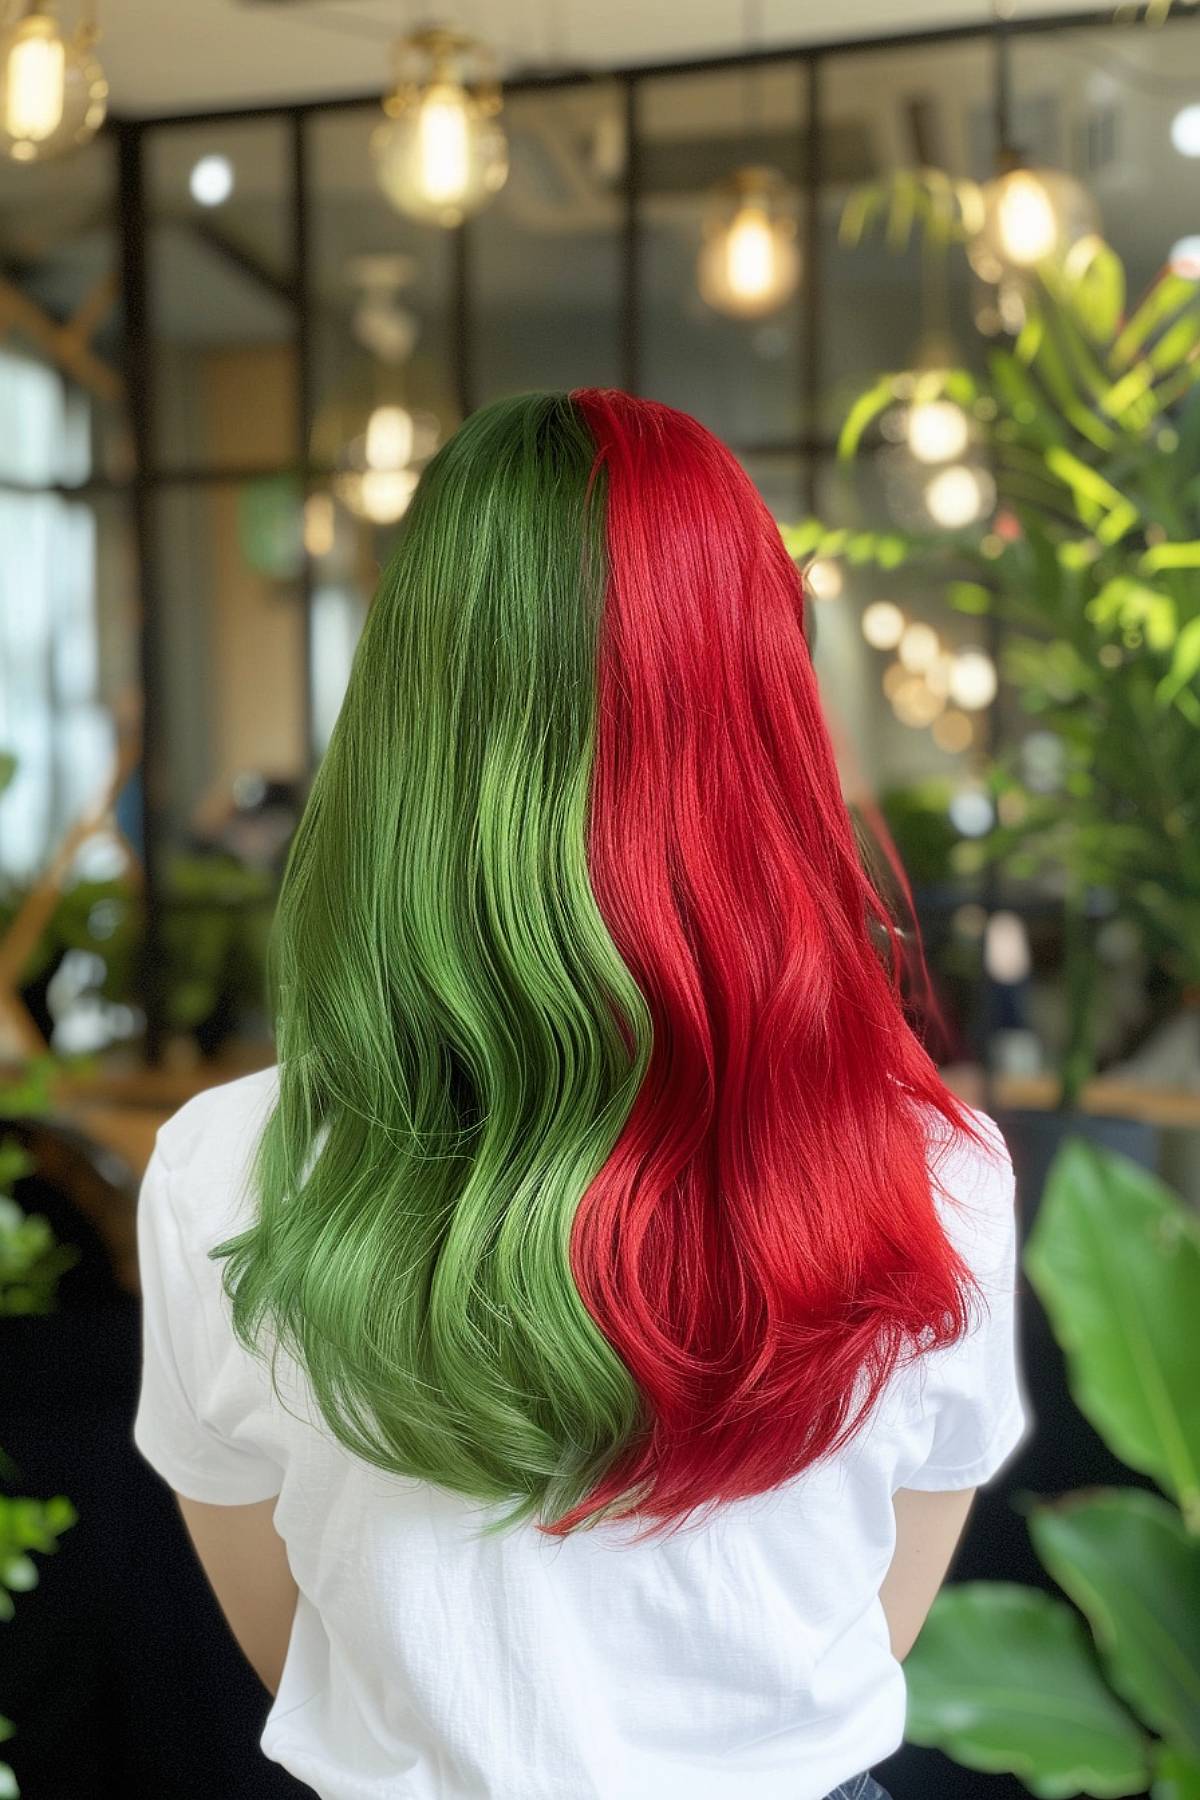 Long, wavy hair with a bold red and green apple-inspired color, reflecting a fiery and energetic Gemini spirit.